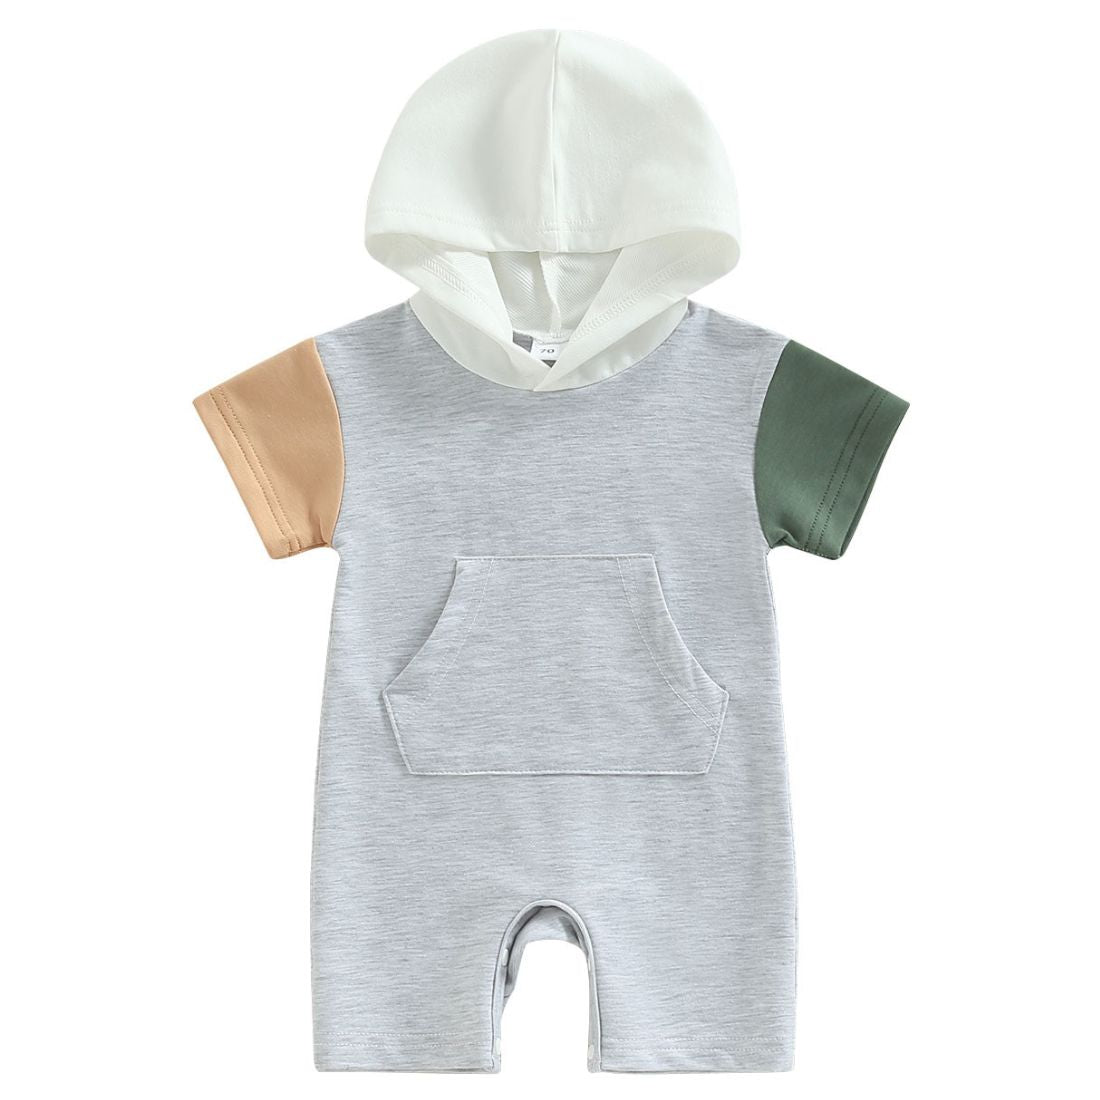 Summer Hood Pocket Baby Romper with Browns and green sleeves